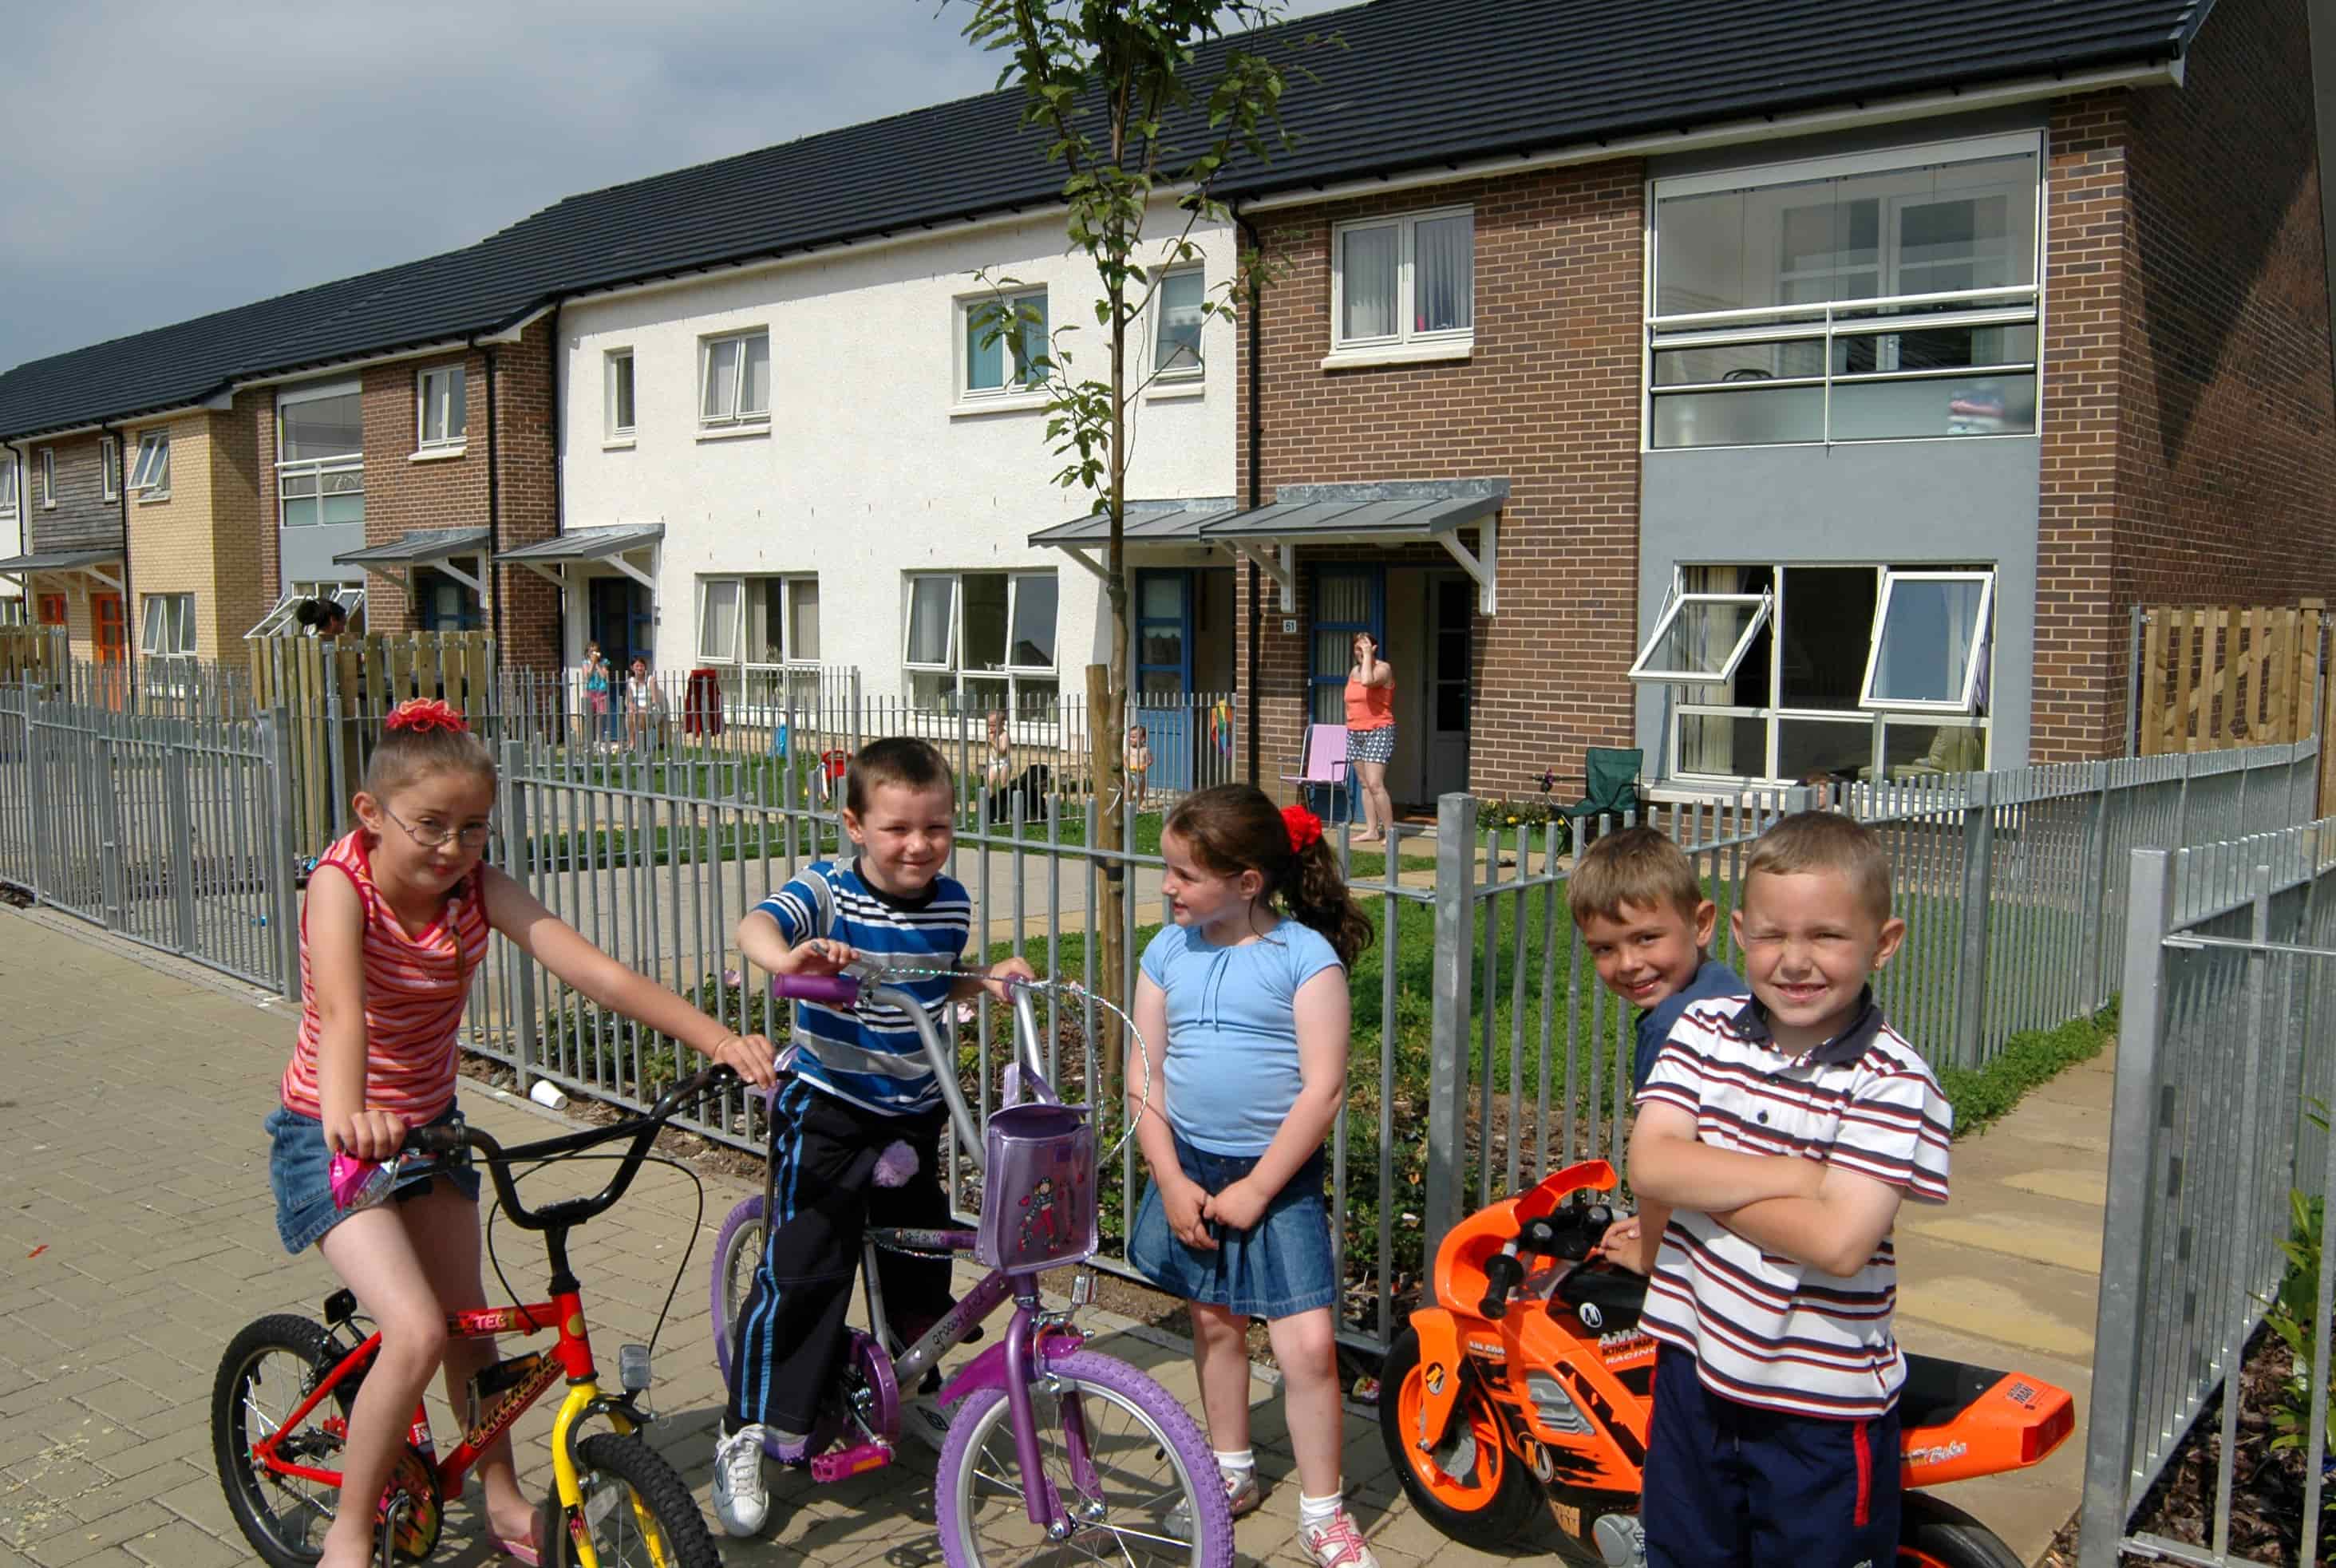 A group of smiling children posing with their bicycles on the pavement in front of their houses.